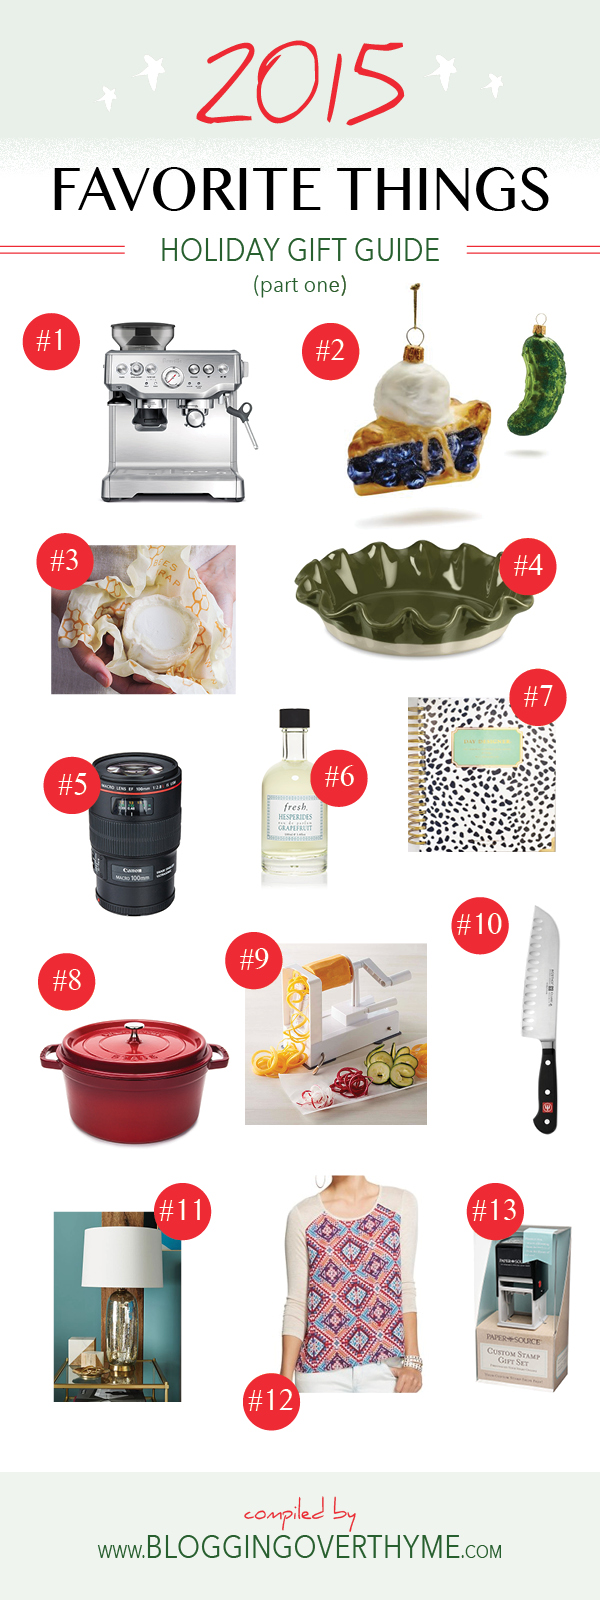 Favorite Things Holiday Gift Guide   A Beautiful Plate